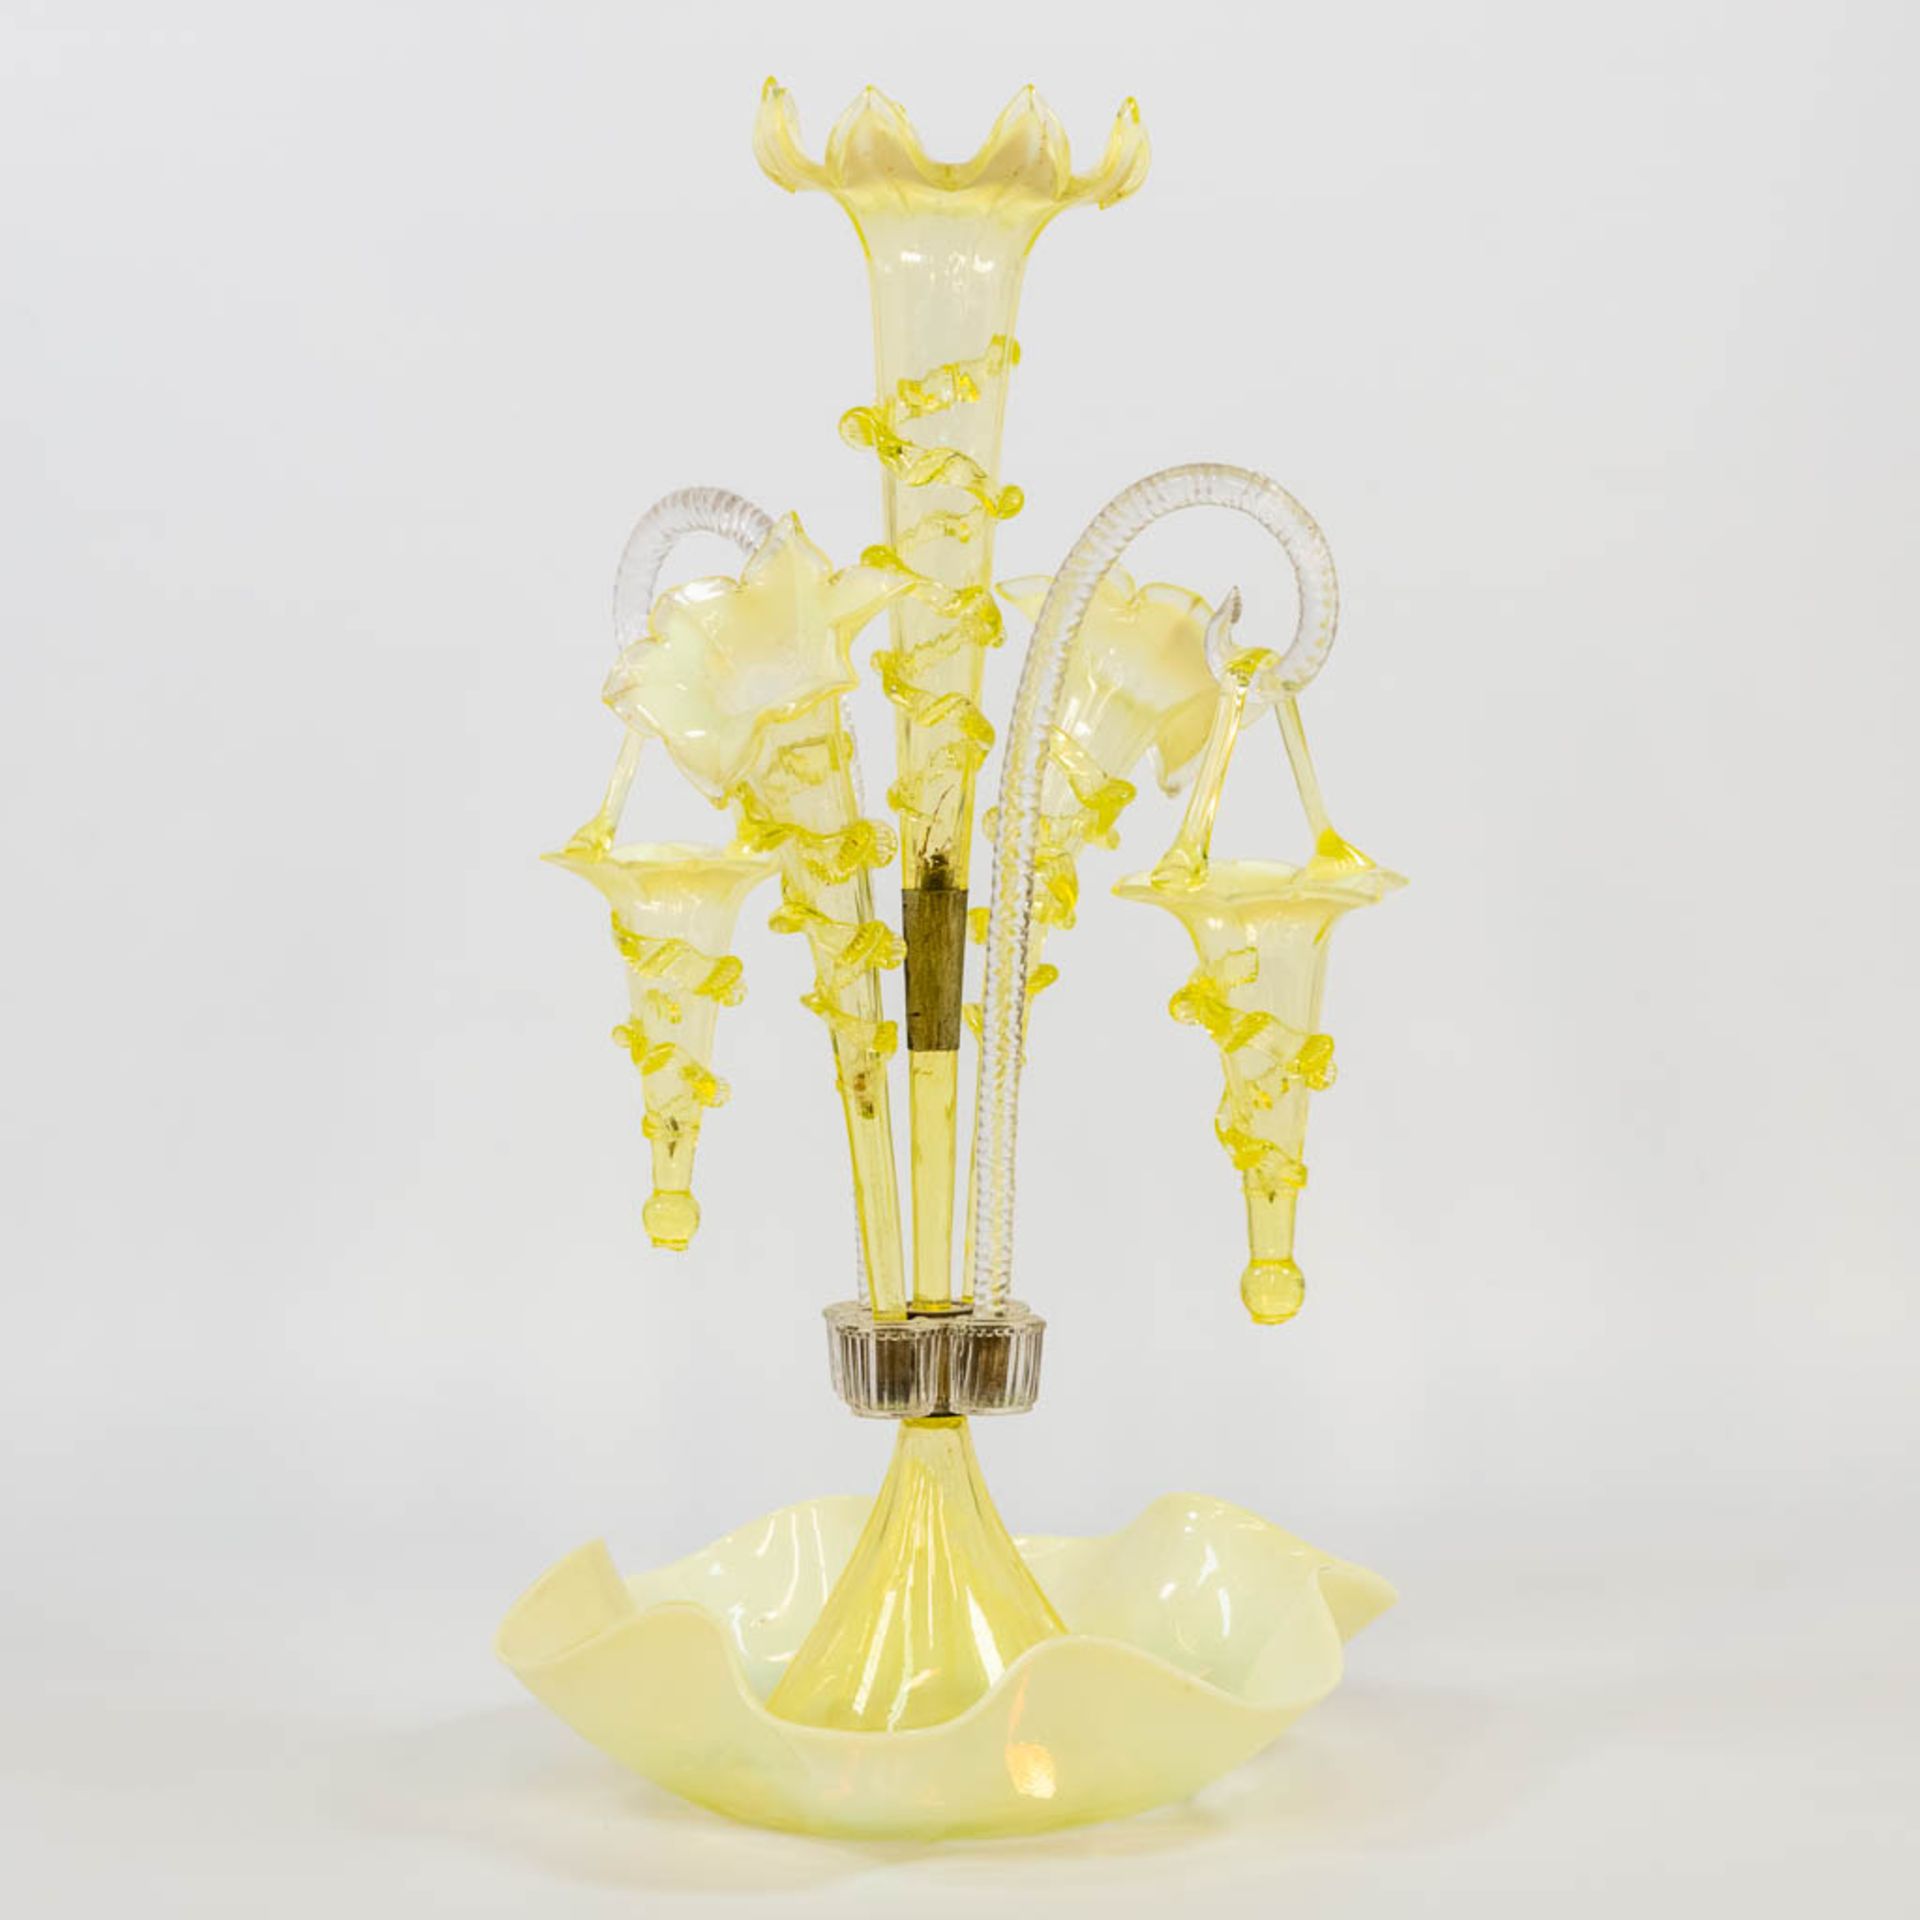 A yellow and clear glass table centrepiece pic-fleur, made in Murano, Italy. (25 x 28 x 45 cm) - Image 7 of 15